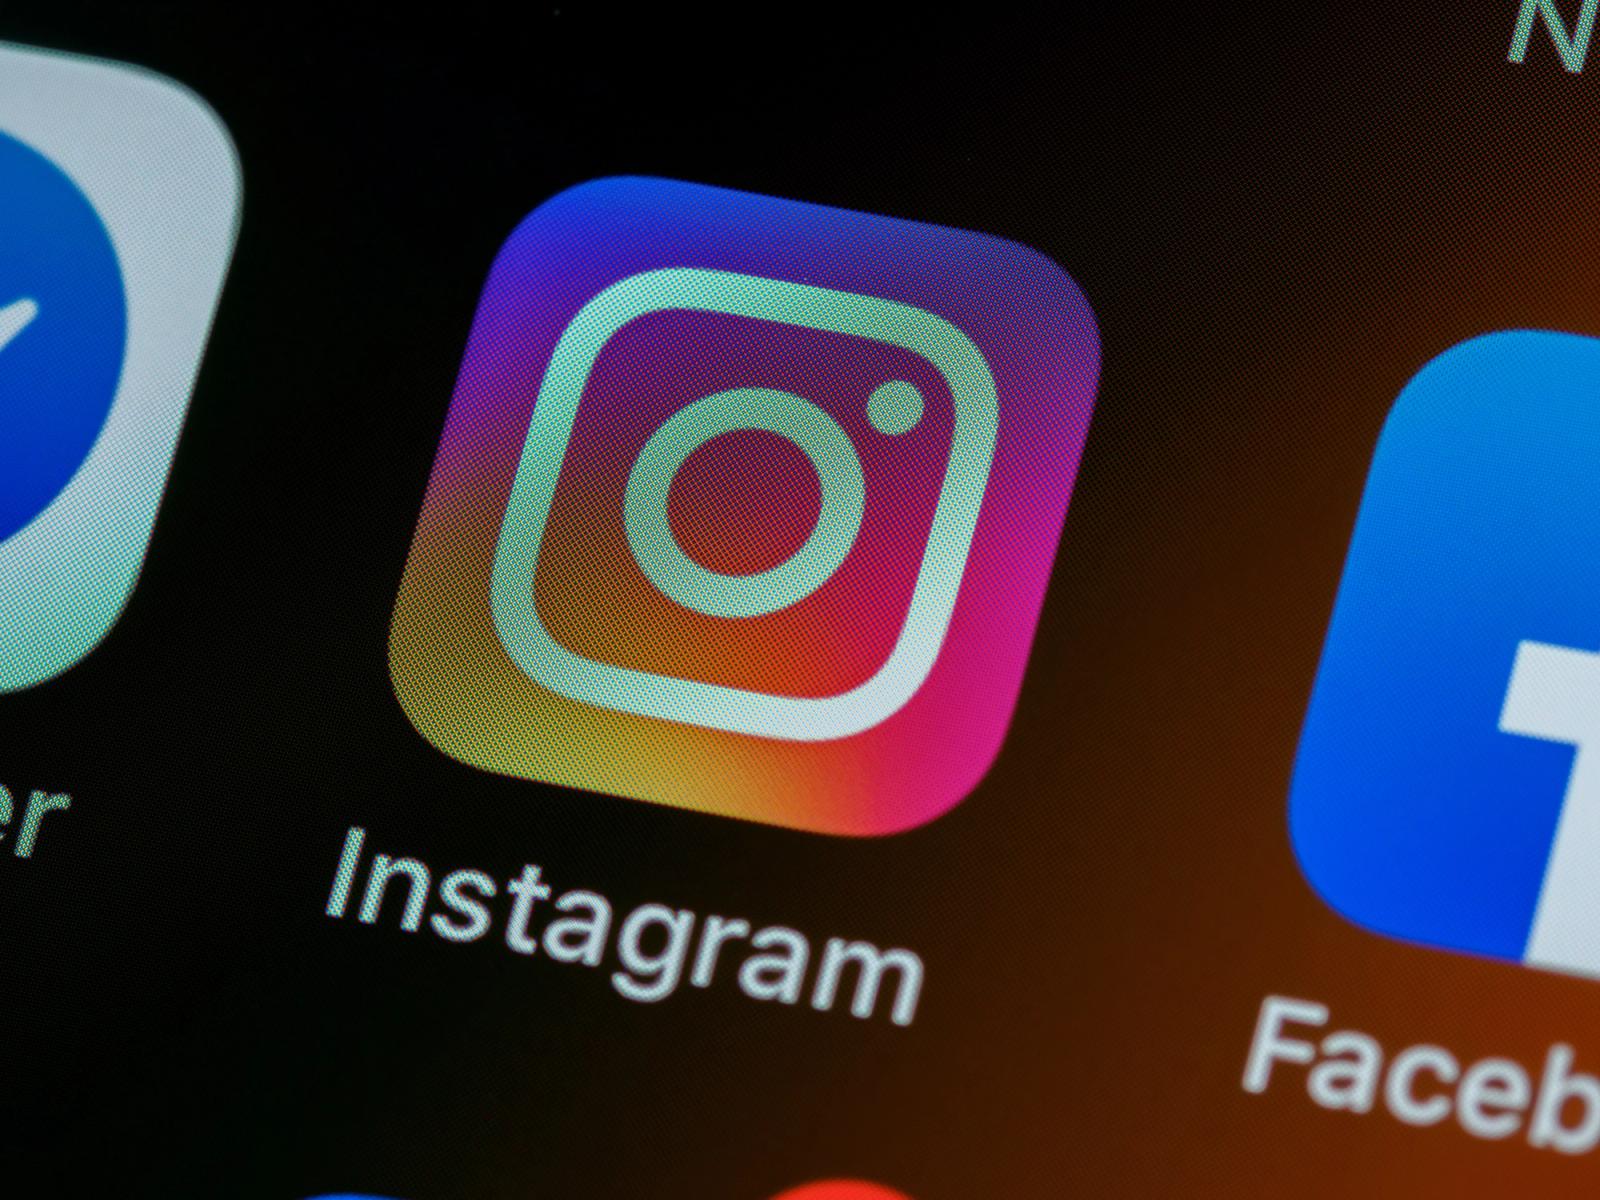 Is Instagram closing down on July 28?